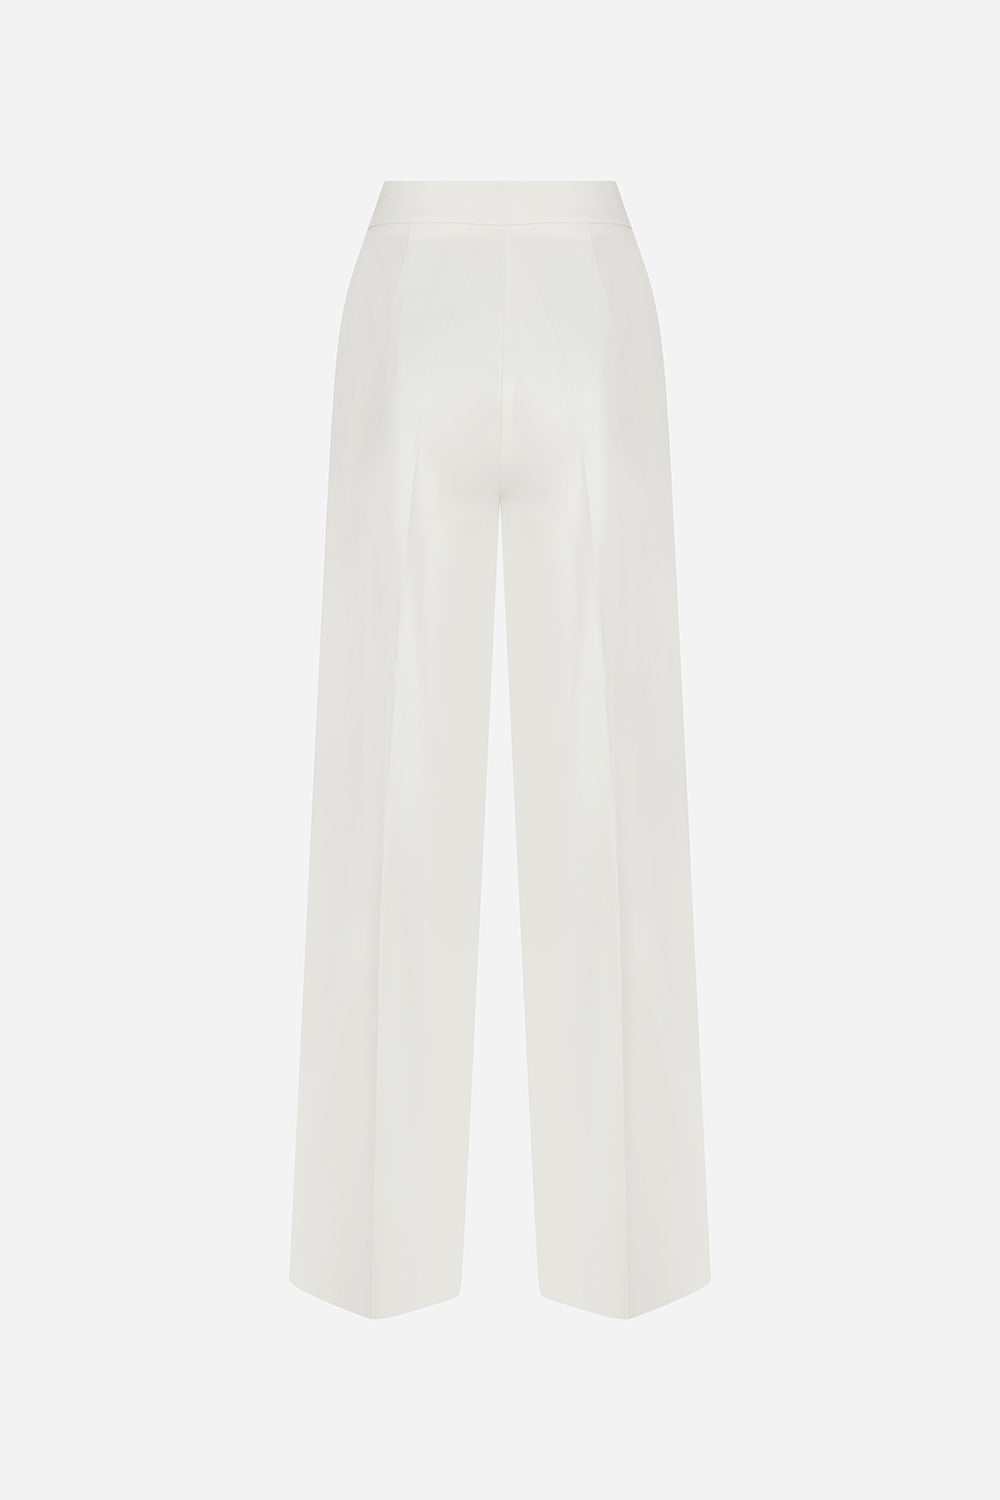 Olivia - Tailored Double Pleated Trousers